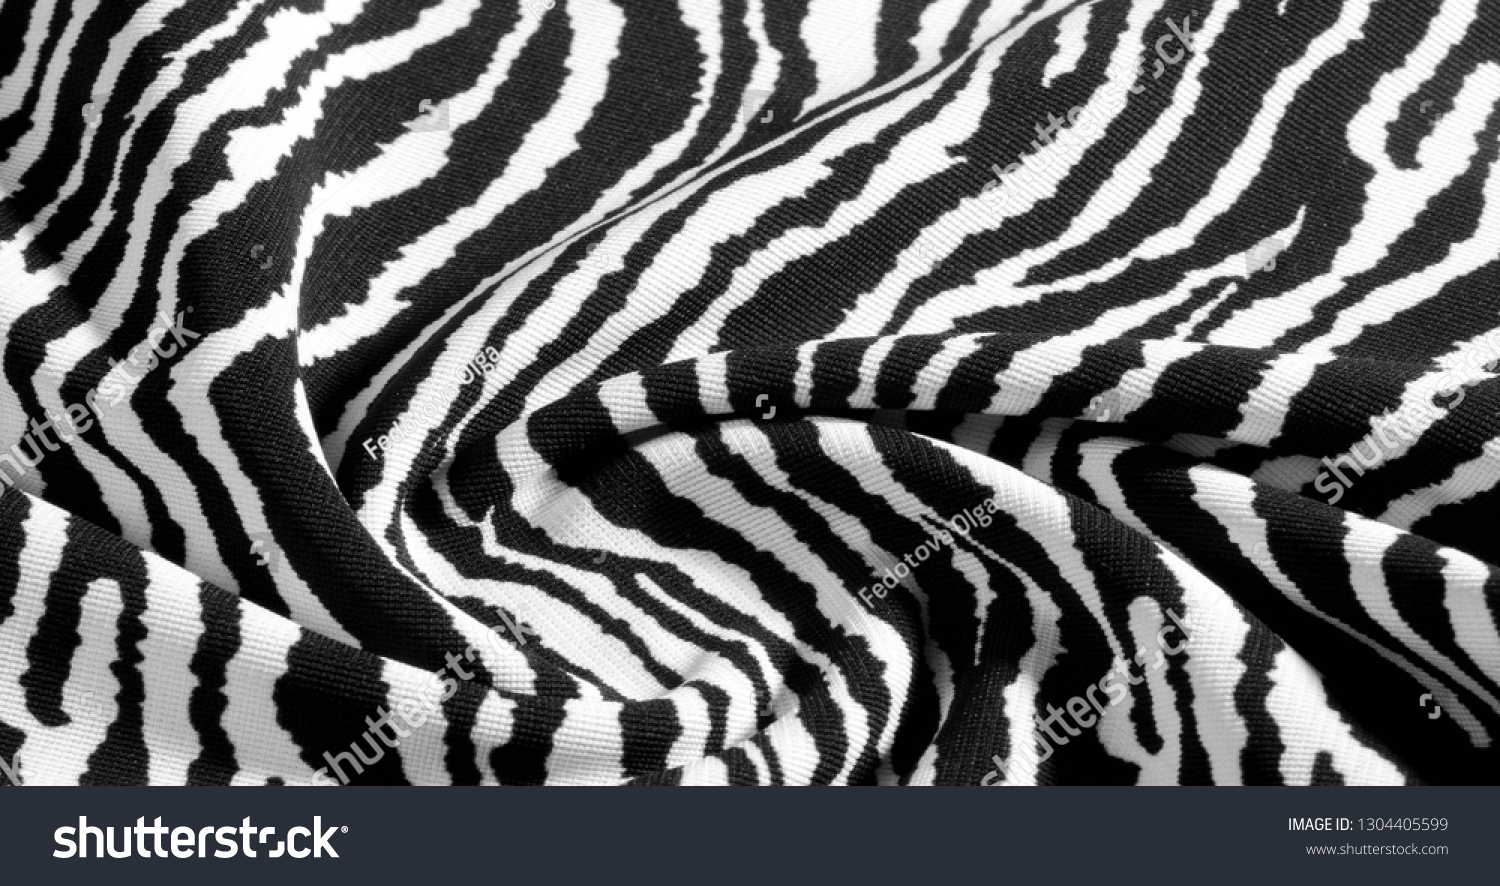 Background, pattern, texture, wallpaper, With the coloring of the animal zebra skin. This extremely soft animal print fabric is perfect for creating your projects, baby accessories, and more! #1304405599